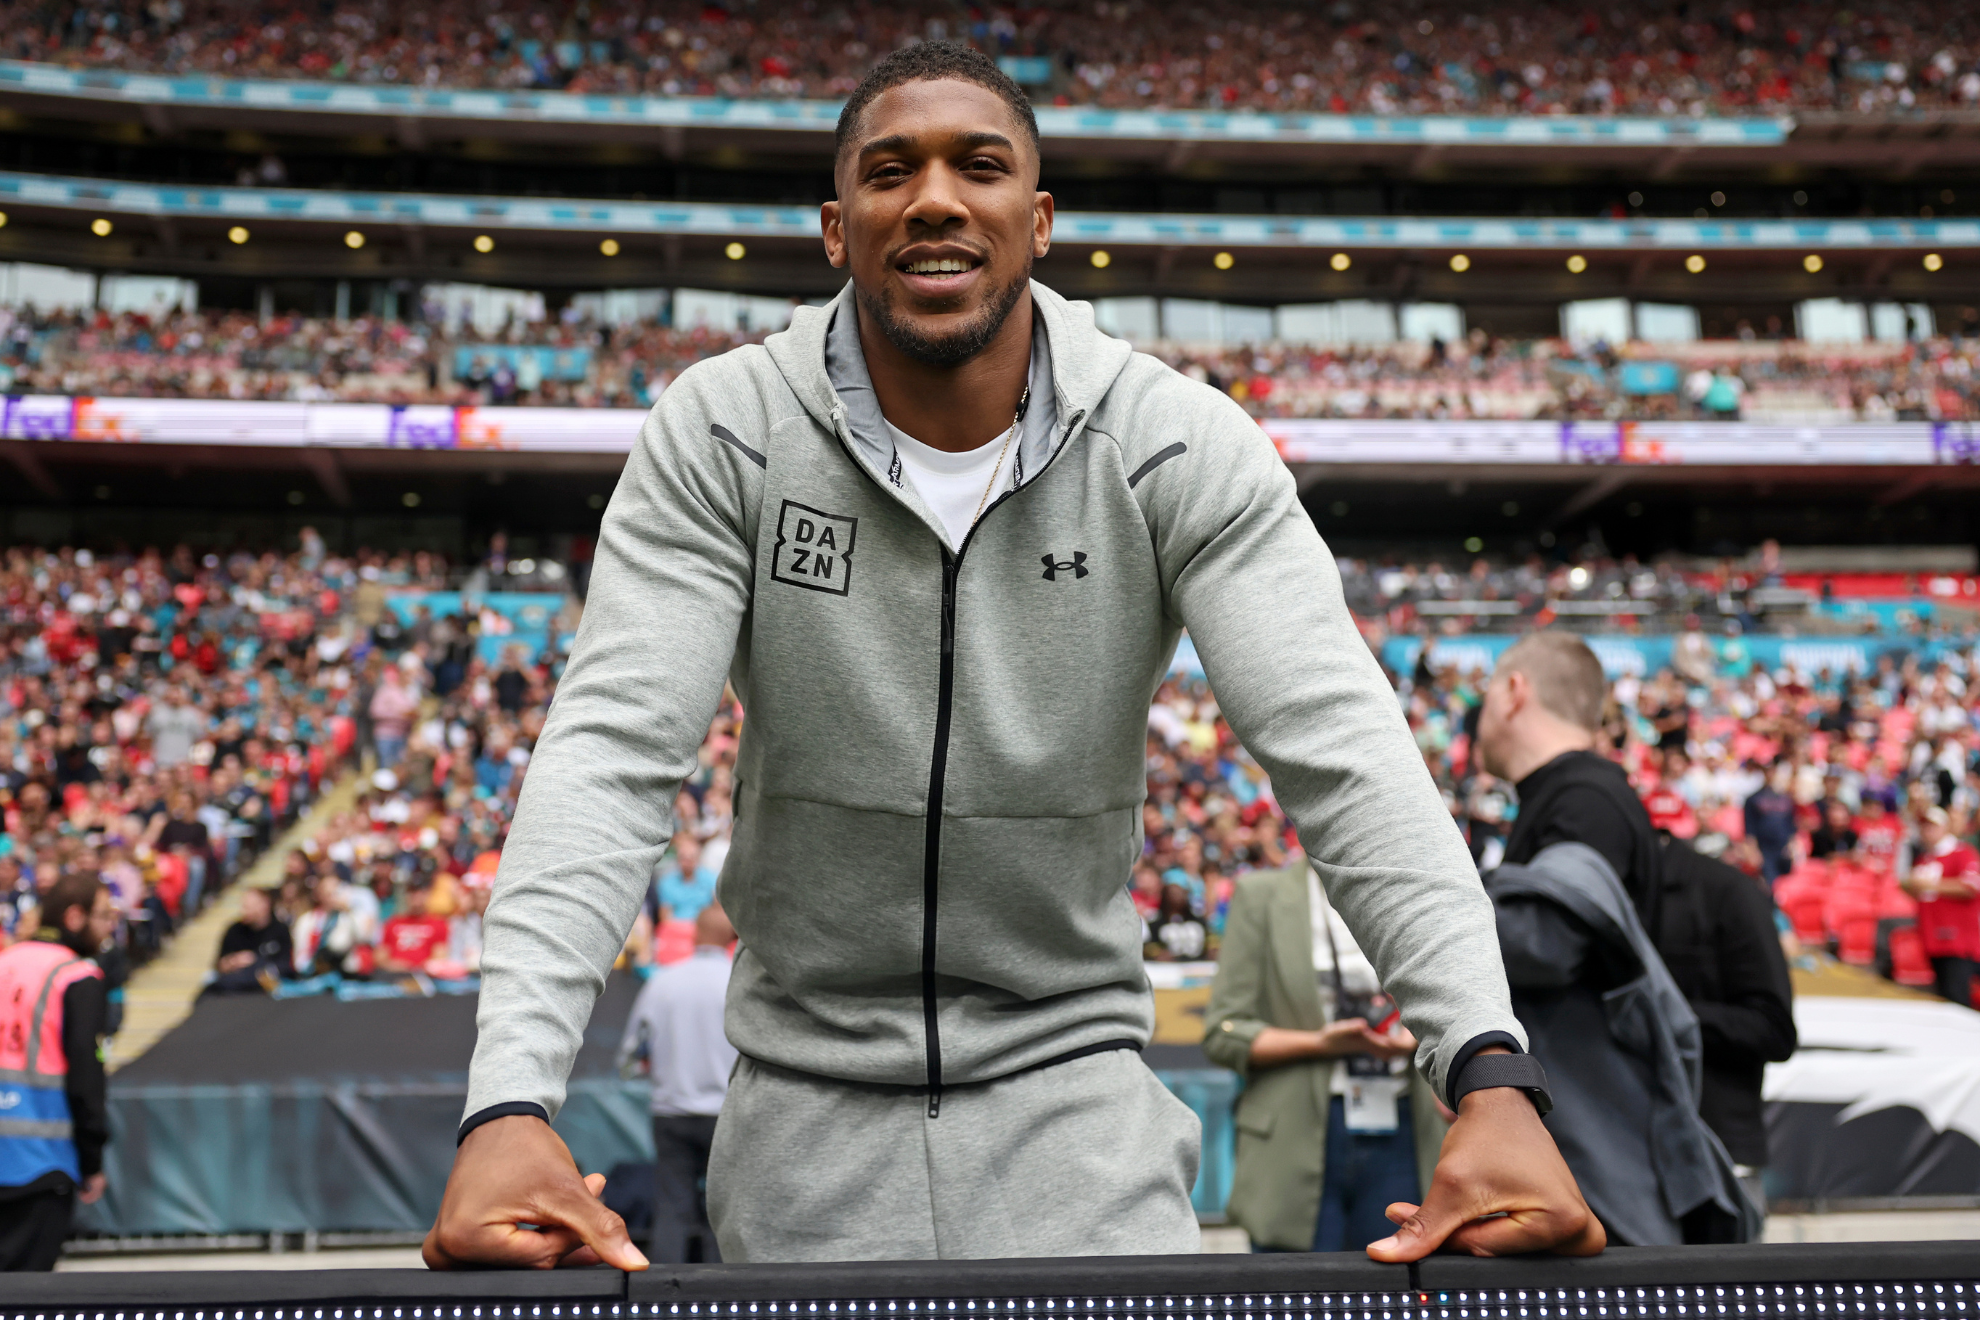 Anthony Joshua at an NFL London game.